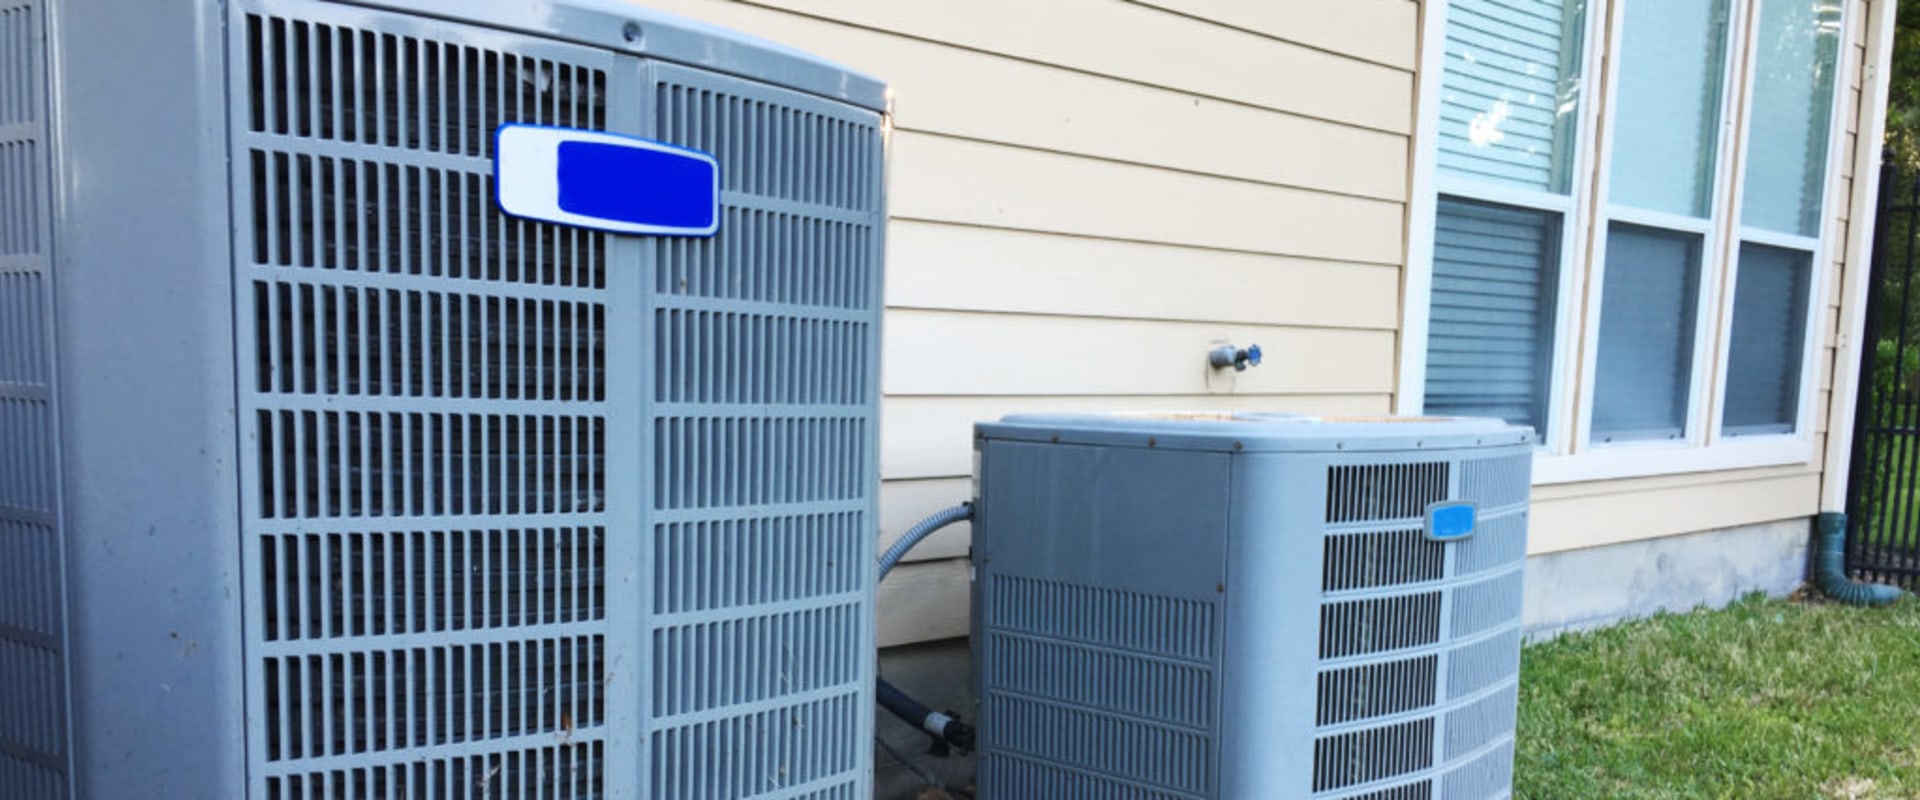 What is the most energy efficient heating and cooling system?